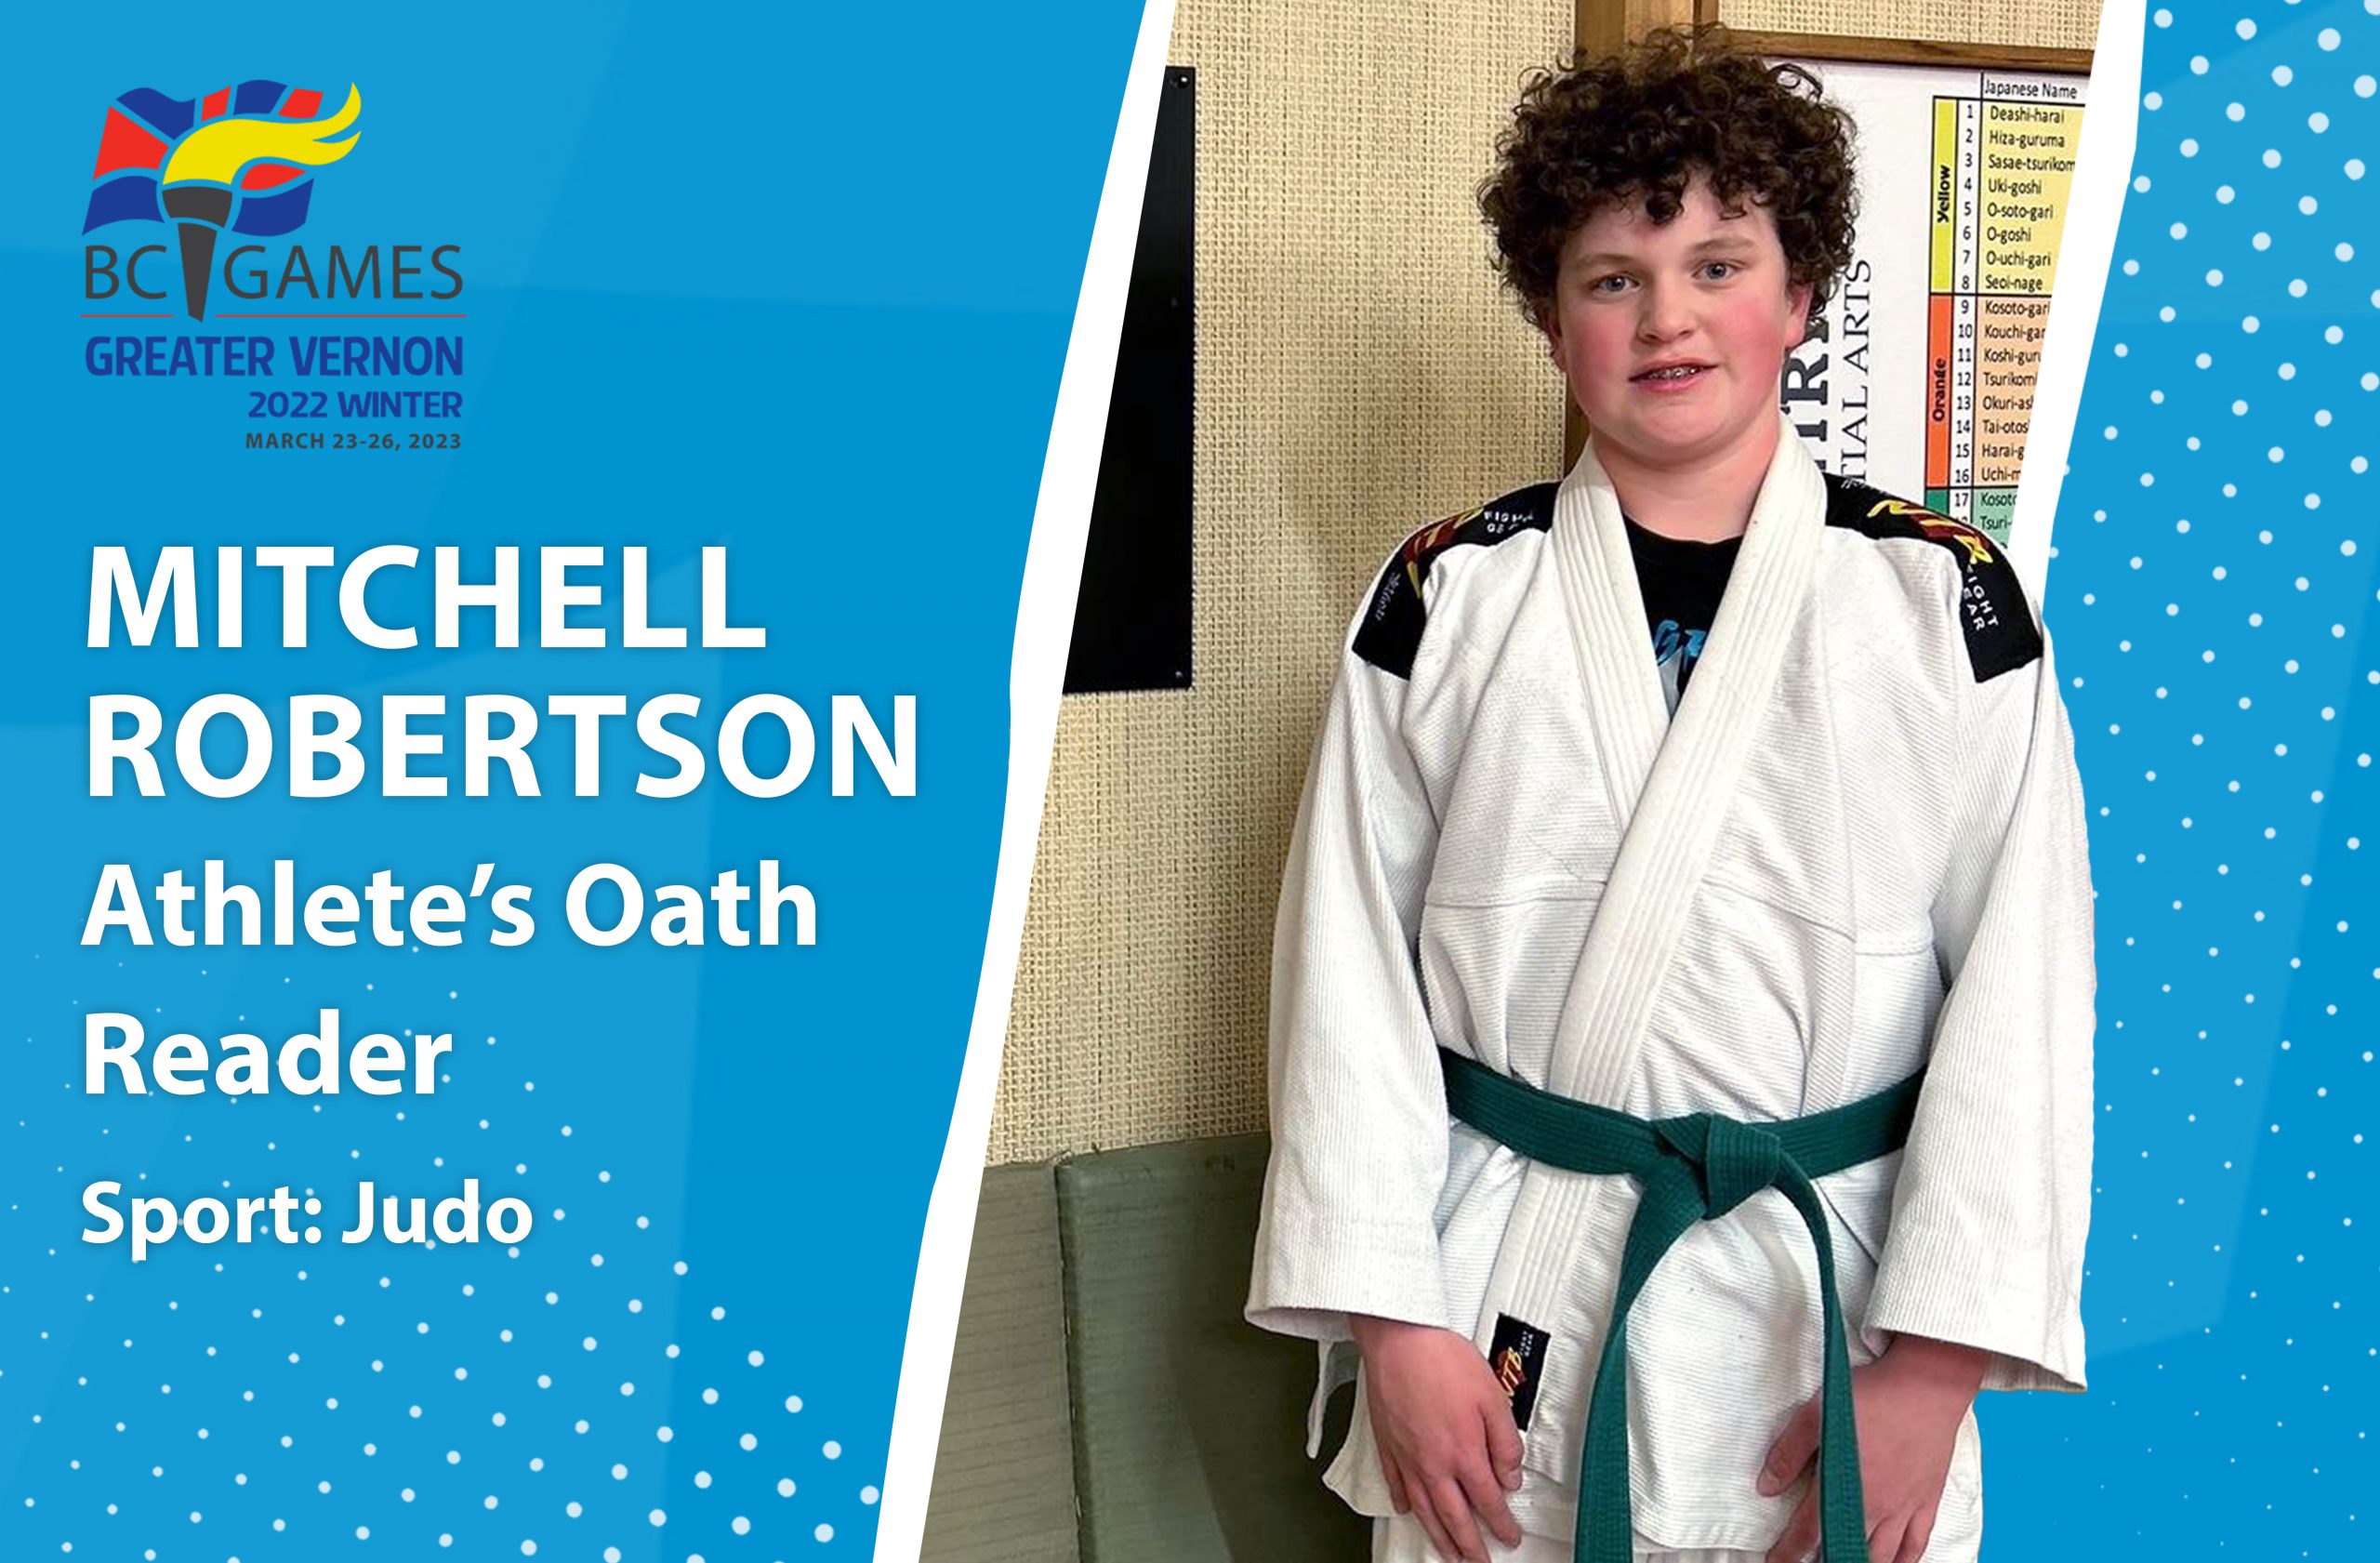 Shown in the photo is Mitchell Robertson in his Judo uniform or "Judogi".